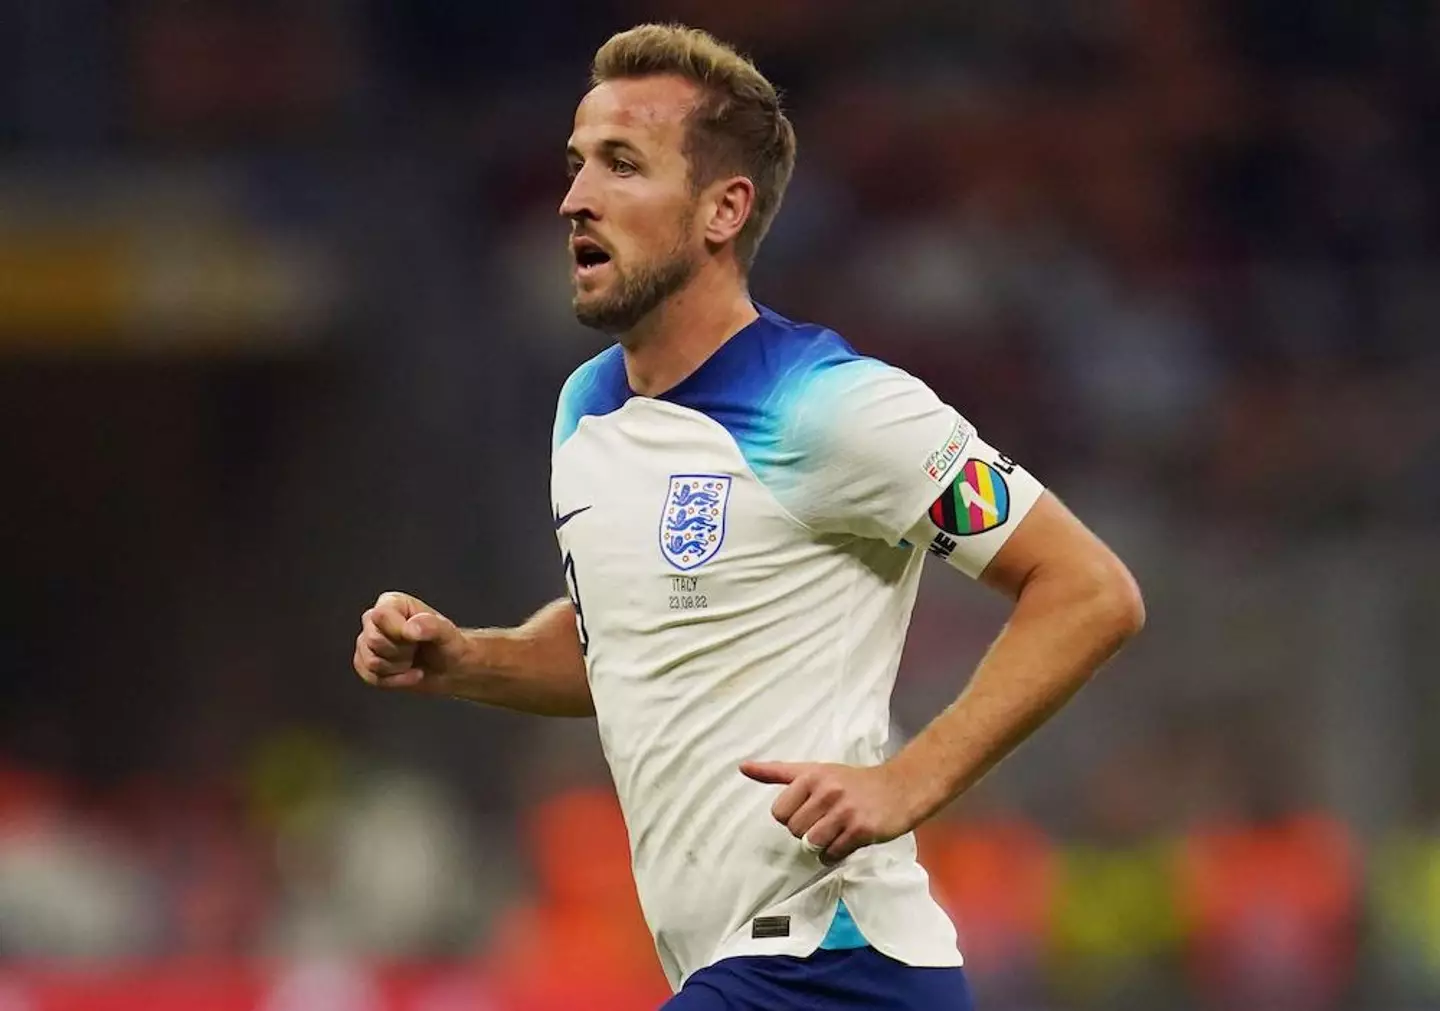 England's Harry Kane was in support of wearing the One Love armband.